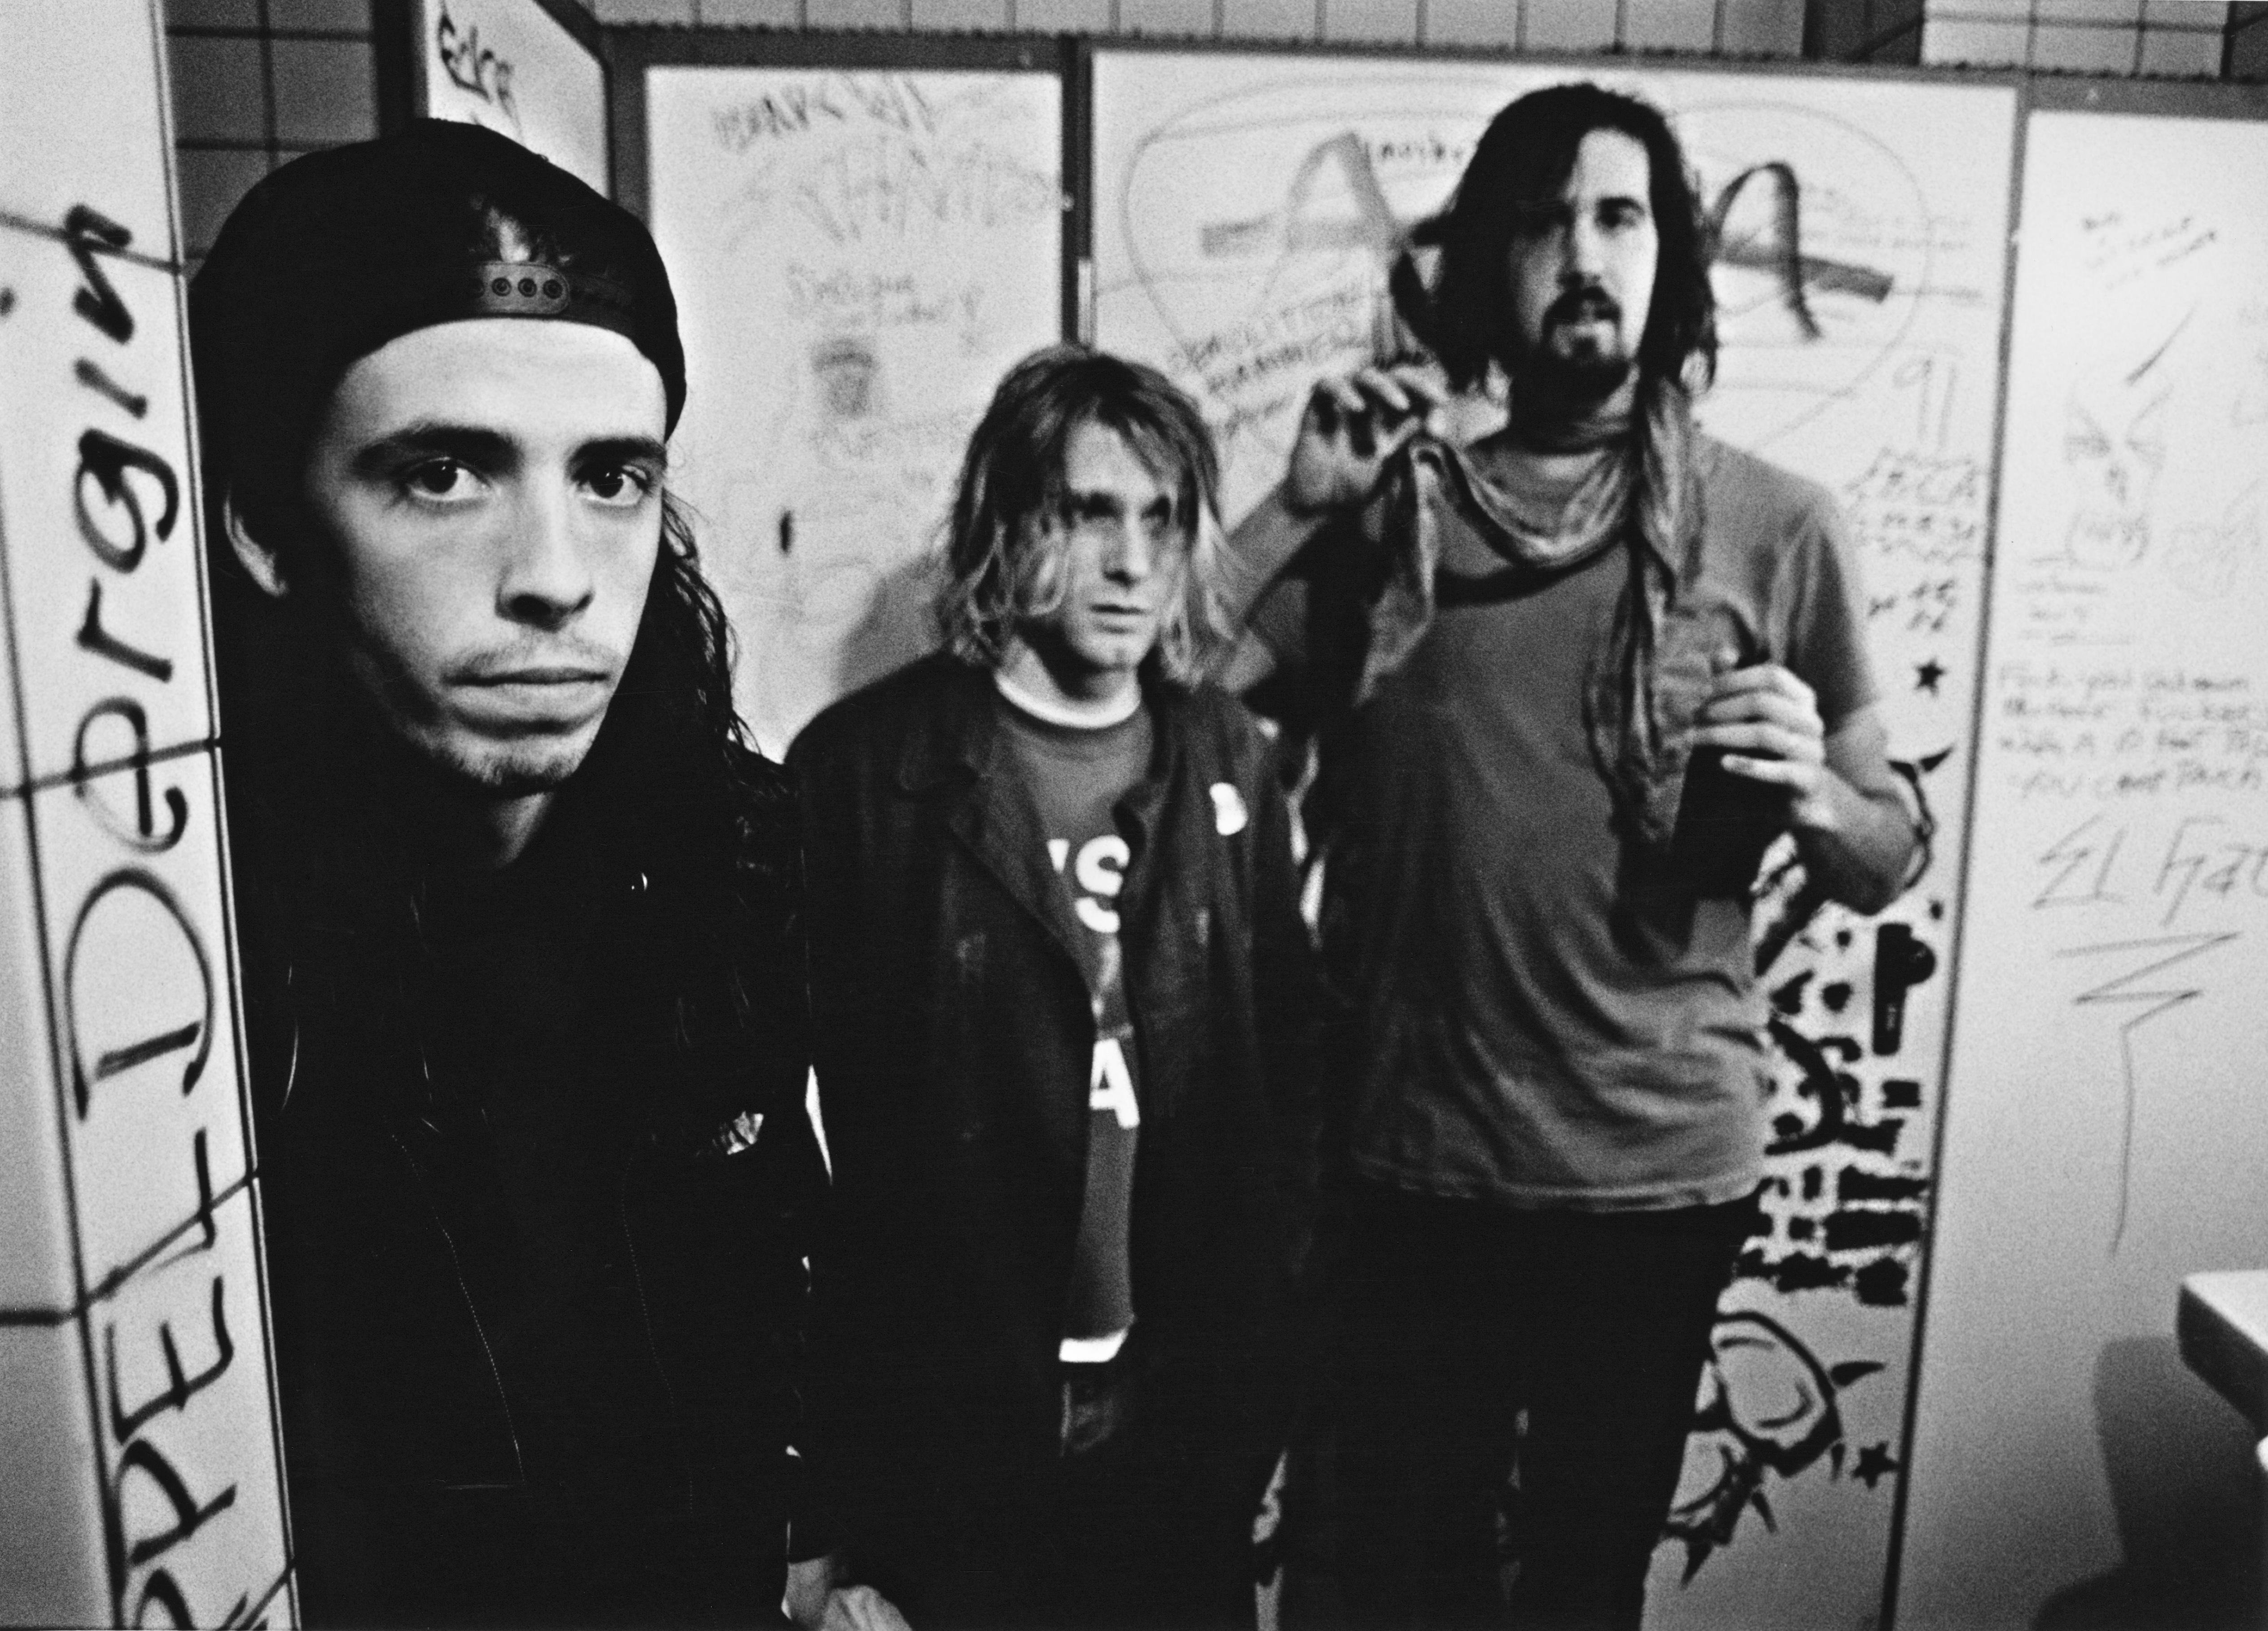 American rock group Nirvana, backstage in Frankfurt, Germany, 12th November 1991. Left to right: drummer Dave Grohl, singer and guitarist Kurt Cobain (1967 - 1994) and bassist Krist Novoselic. 